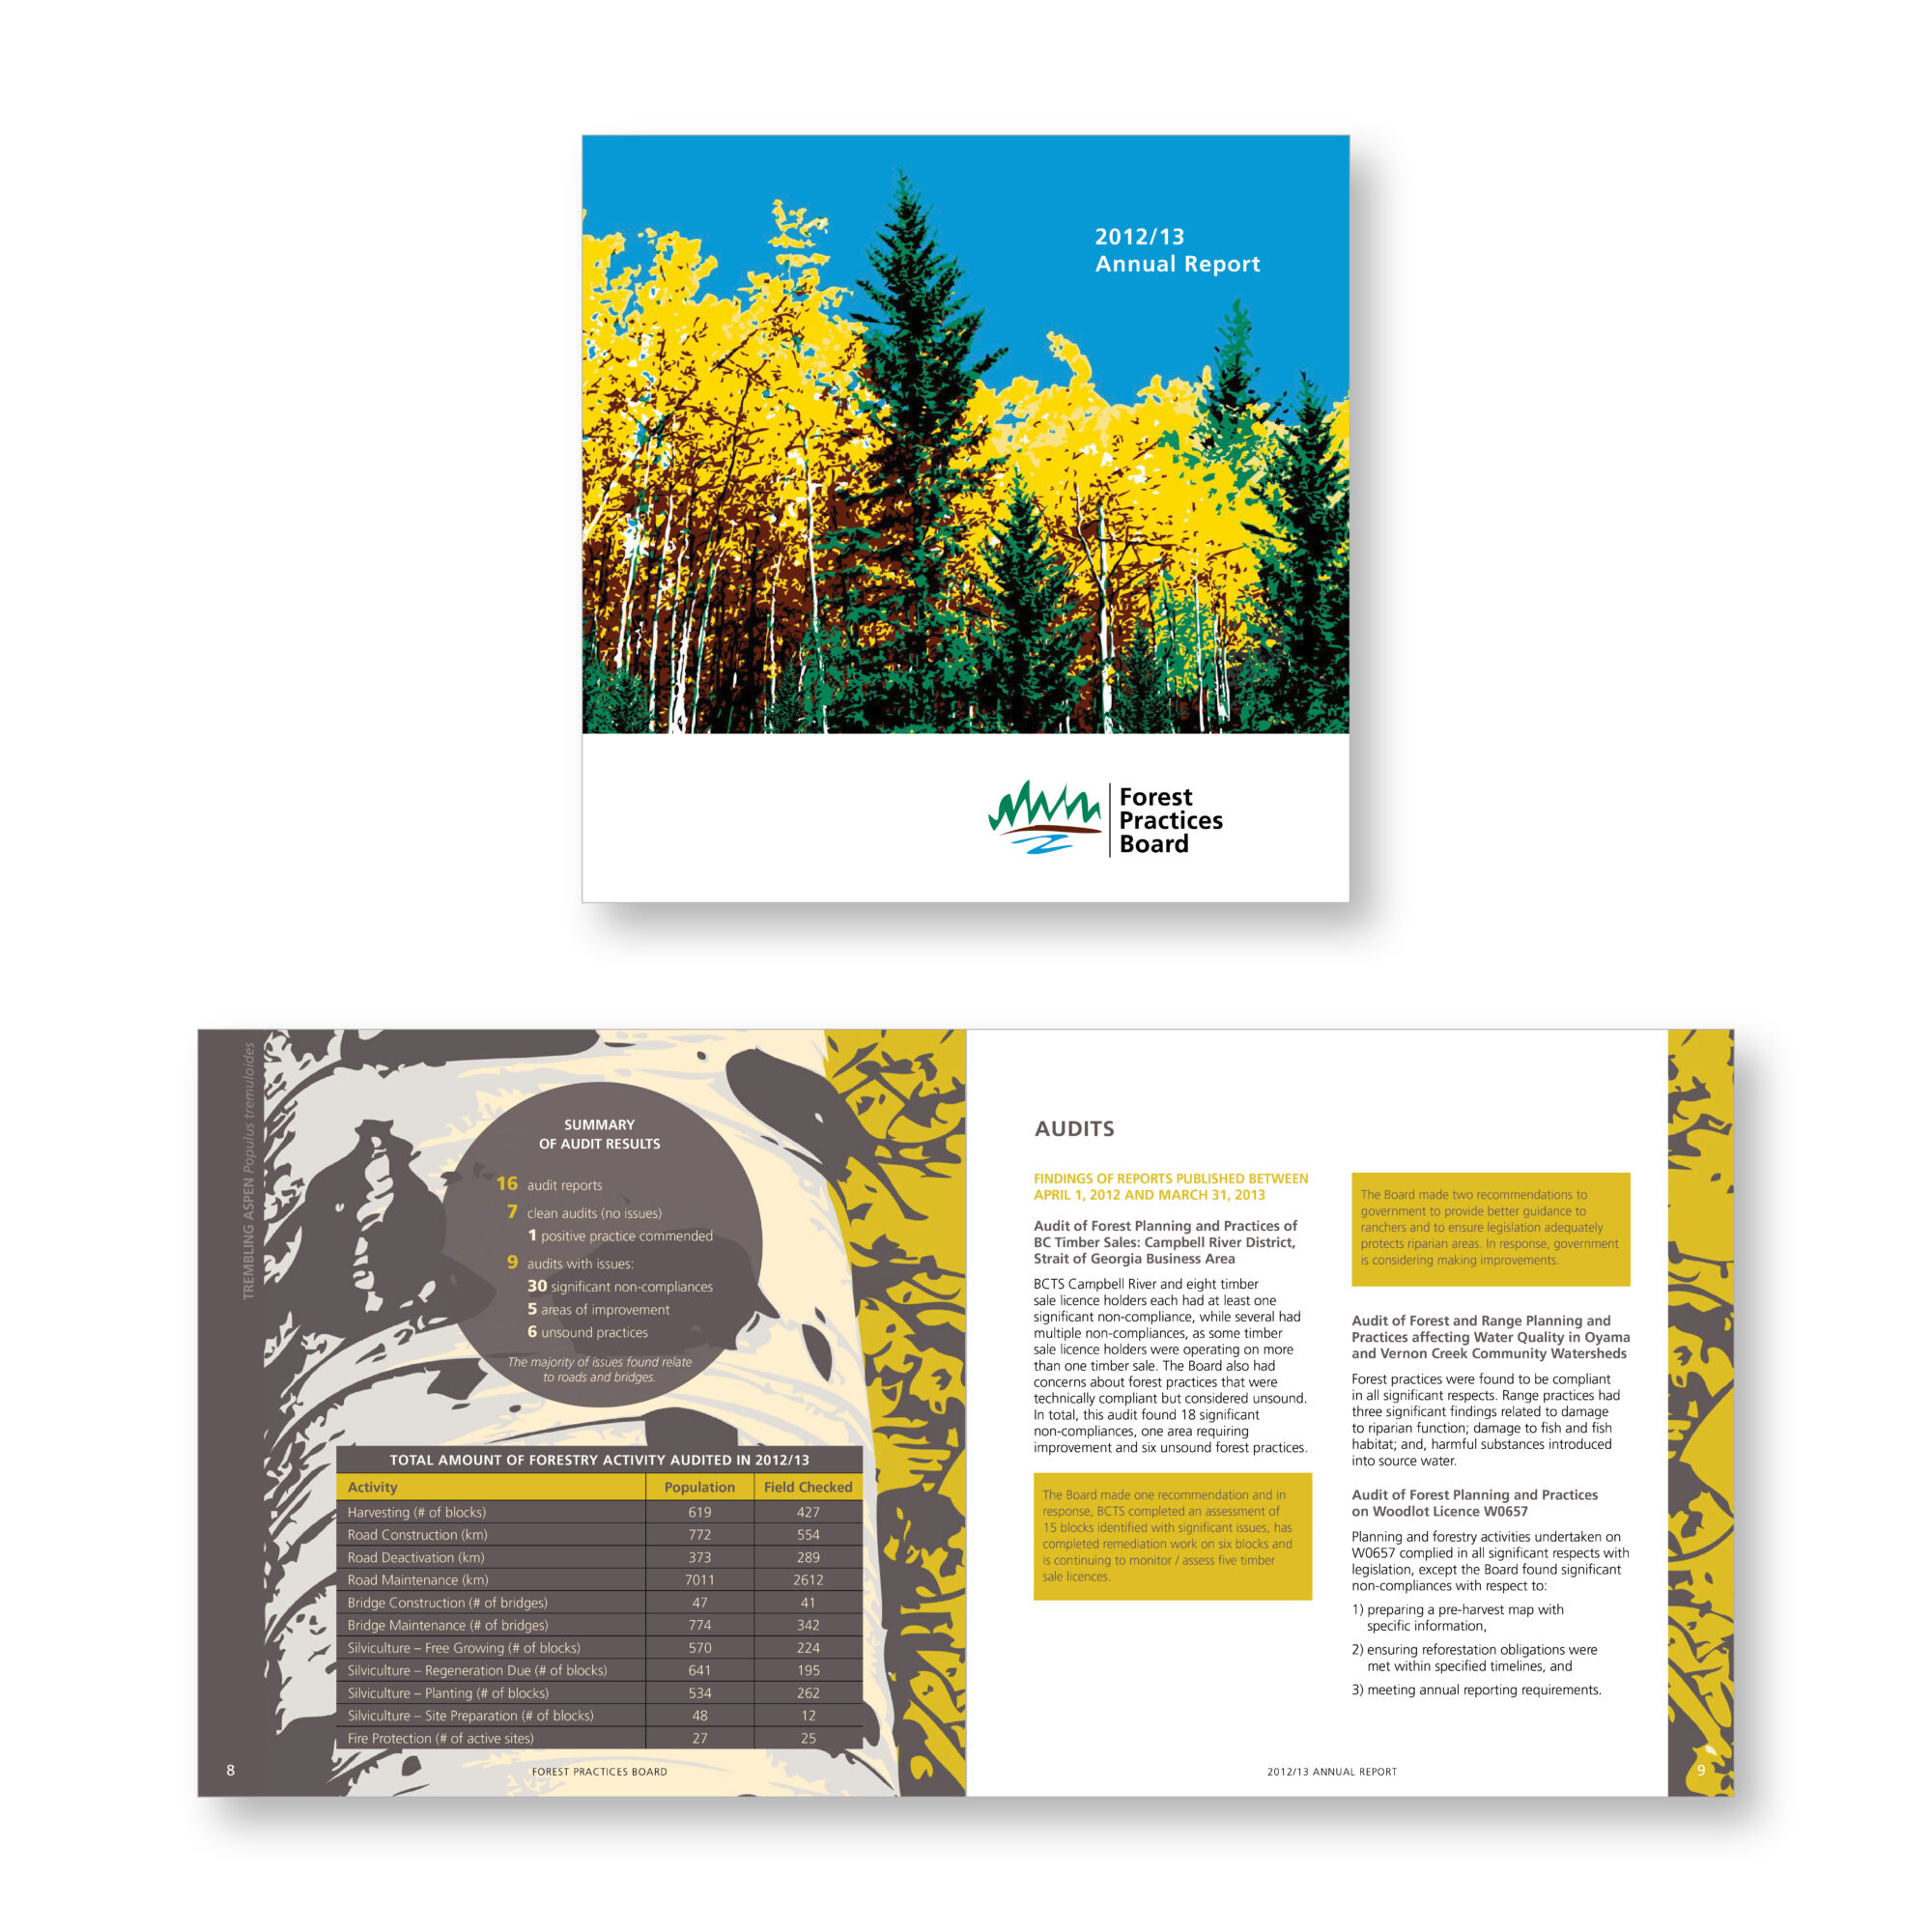 Forest Practices Board - 2012/13 Annual Report